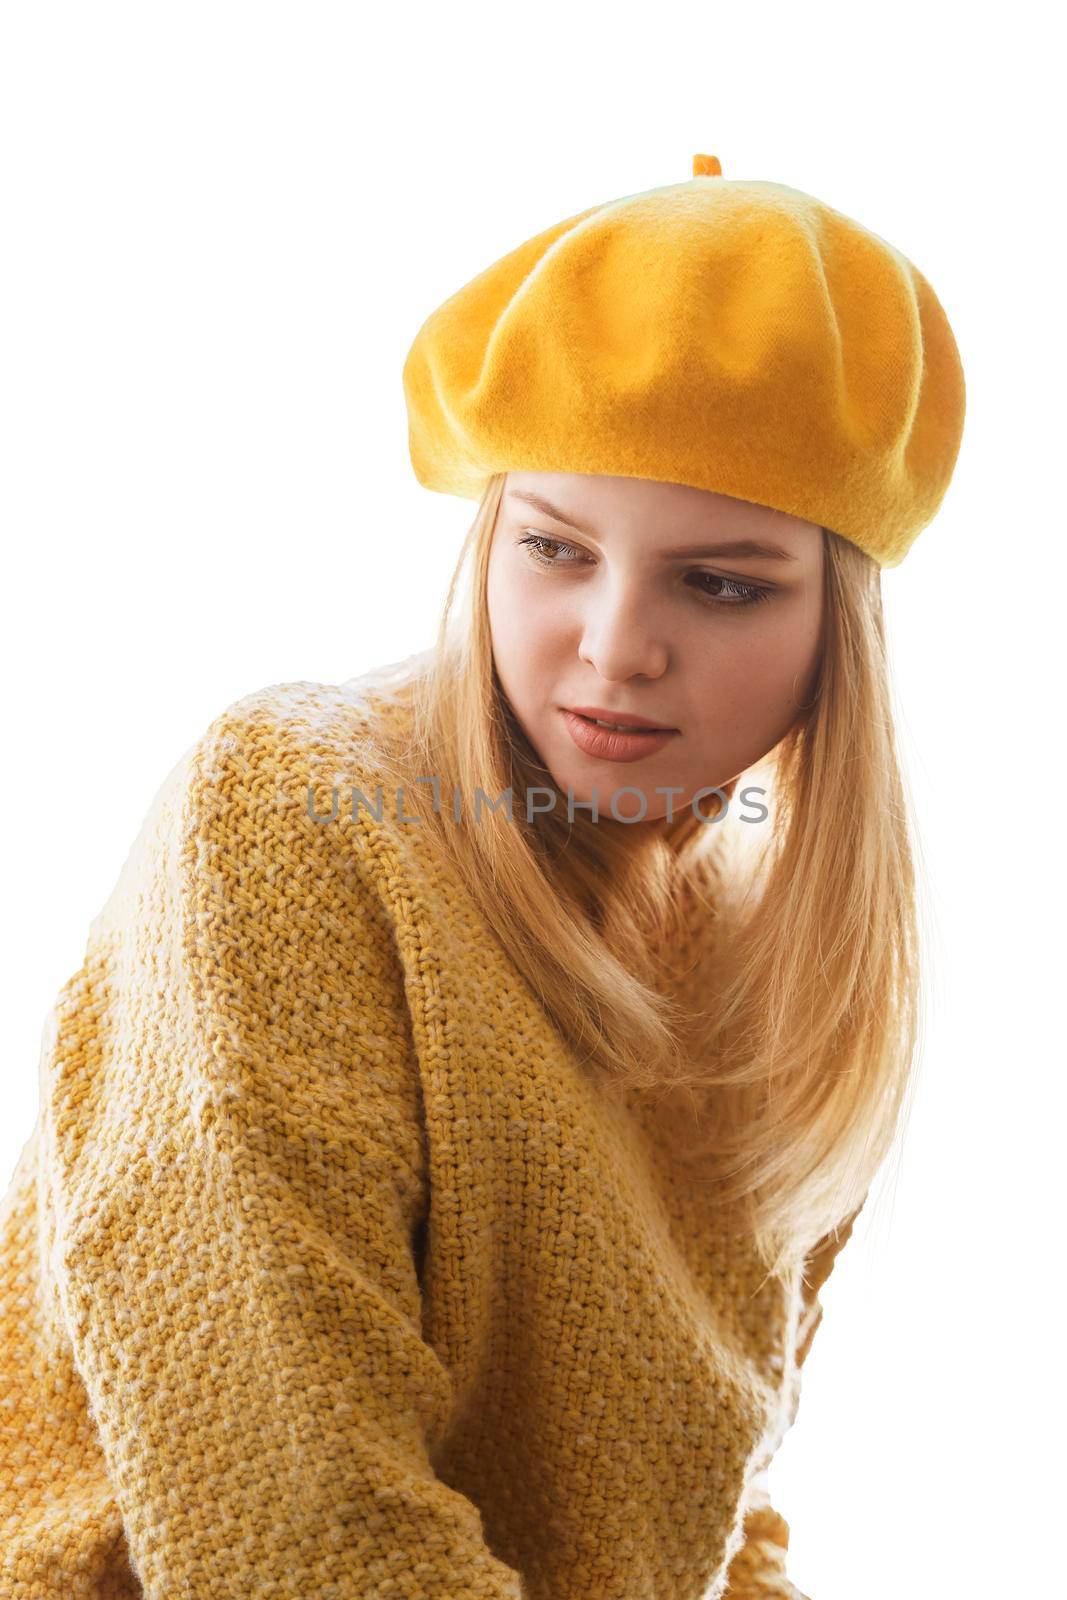 portrait of a young woman in a yellow beret, isolate on a white background